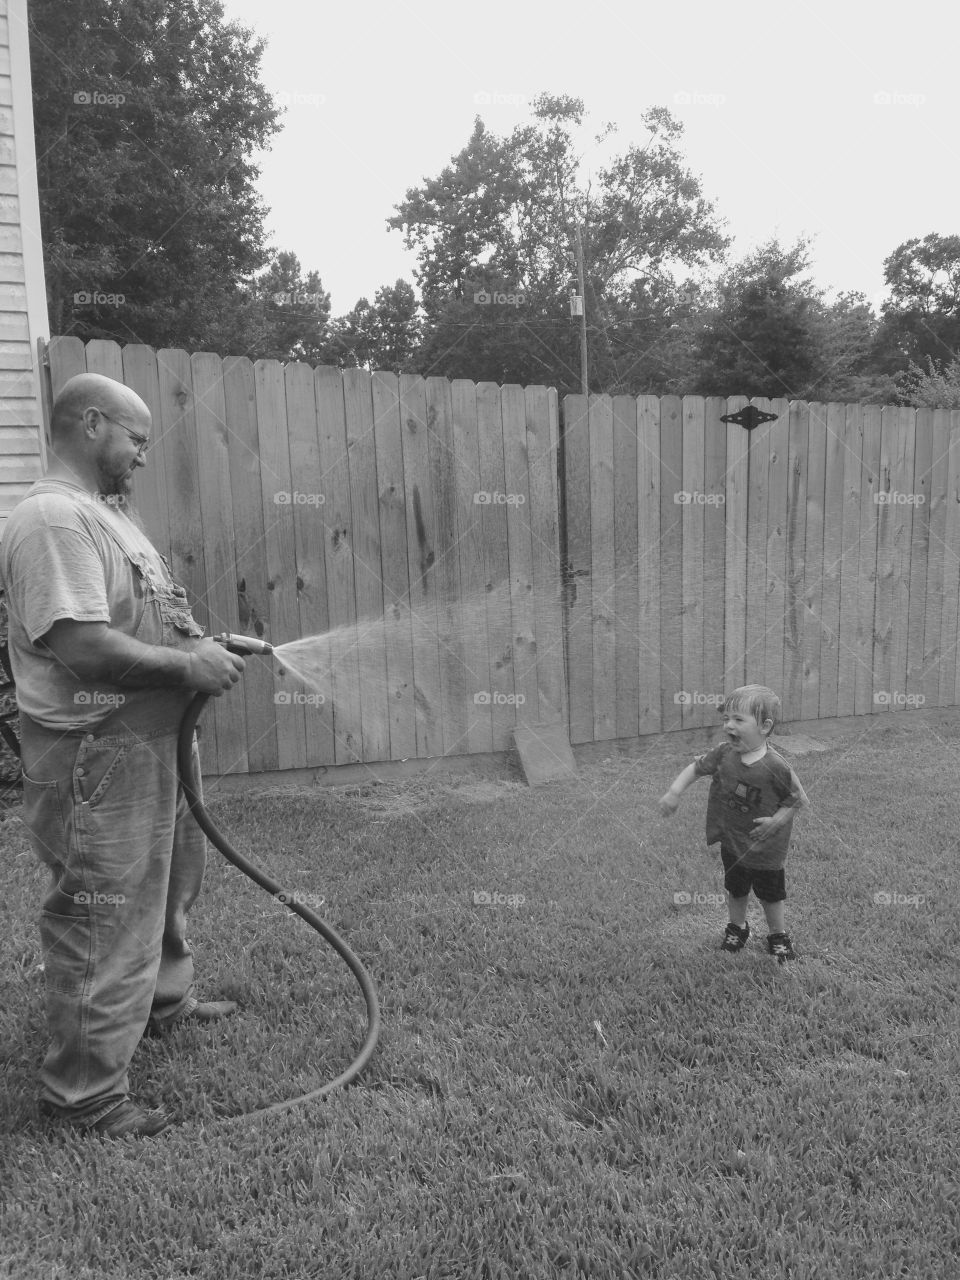 Grandpa spraying grandchild with water from water hose